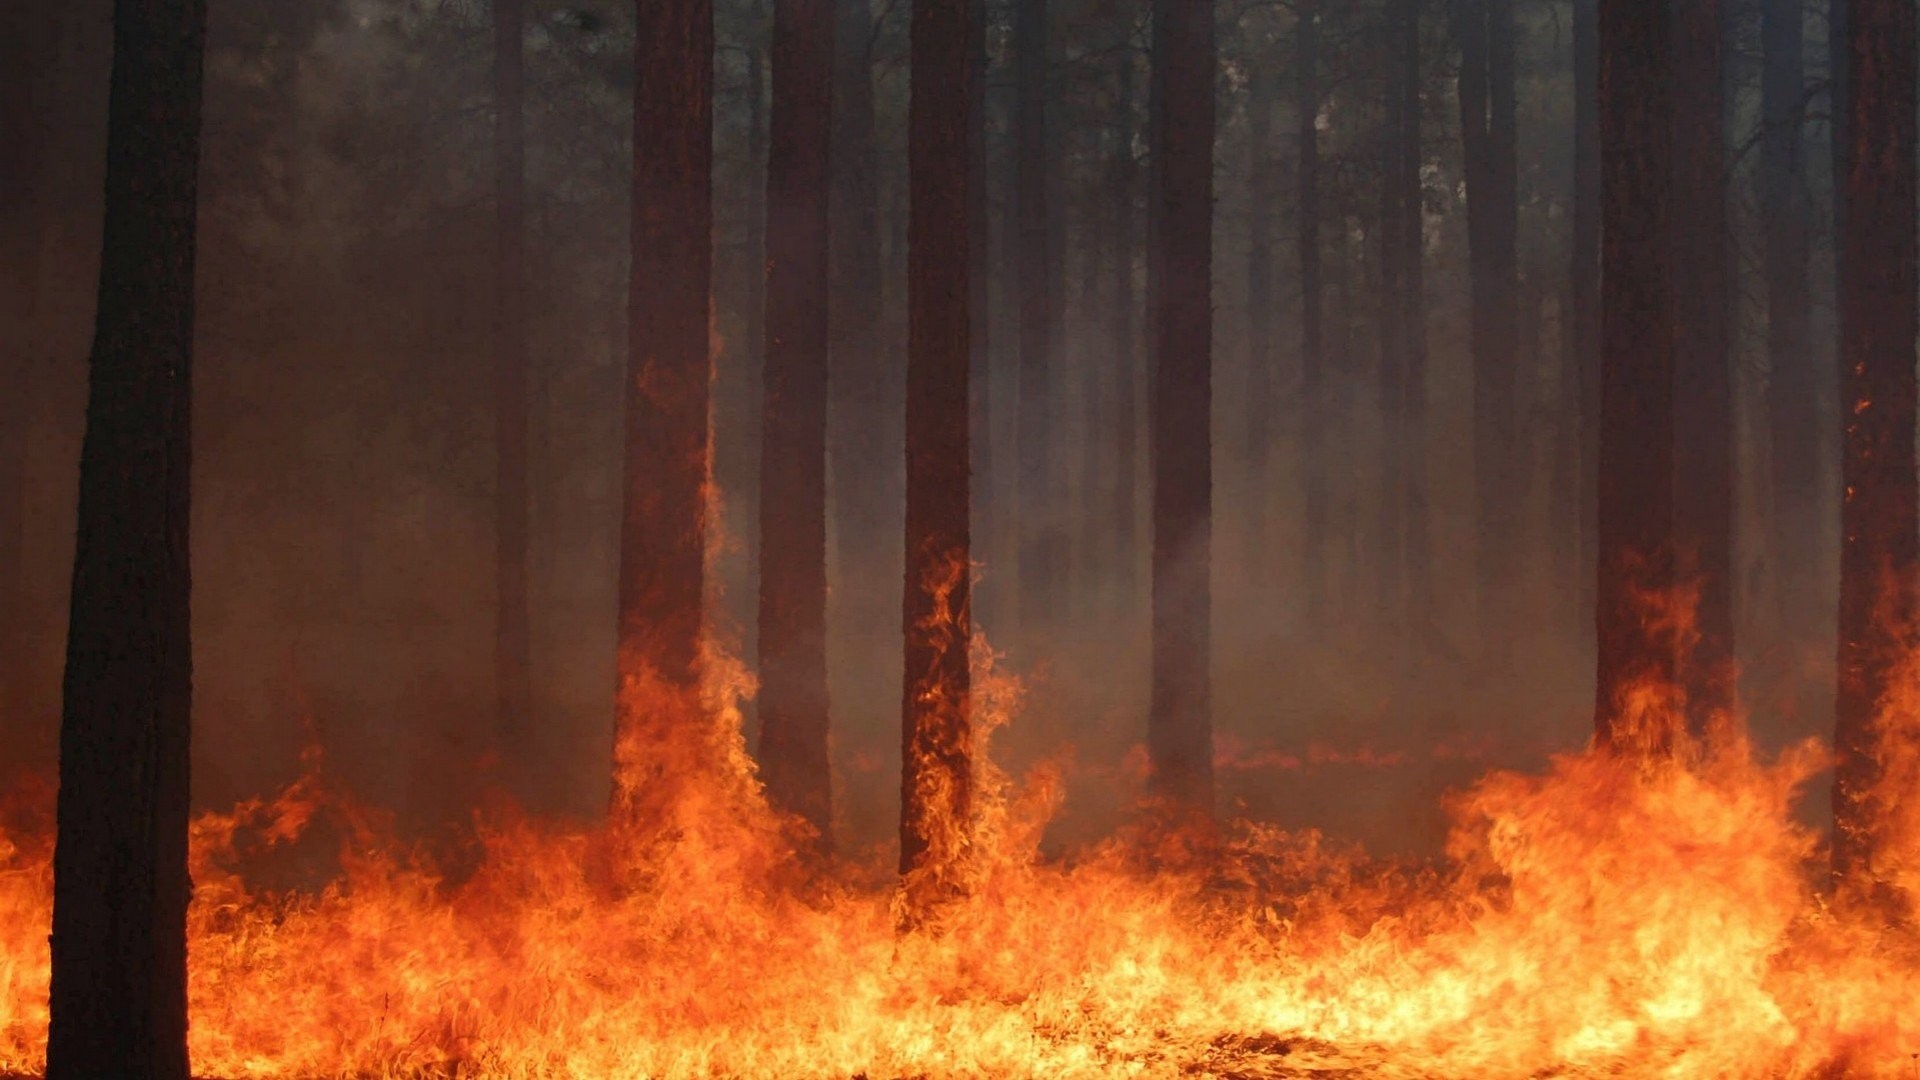 1920x1080 Forest fire flames tree disaster apocalyptic (1) wallpaper |  |  415768 | WallpaperUP